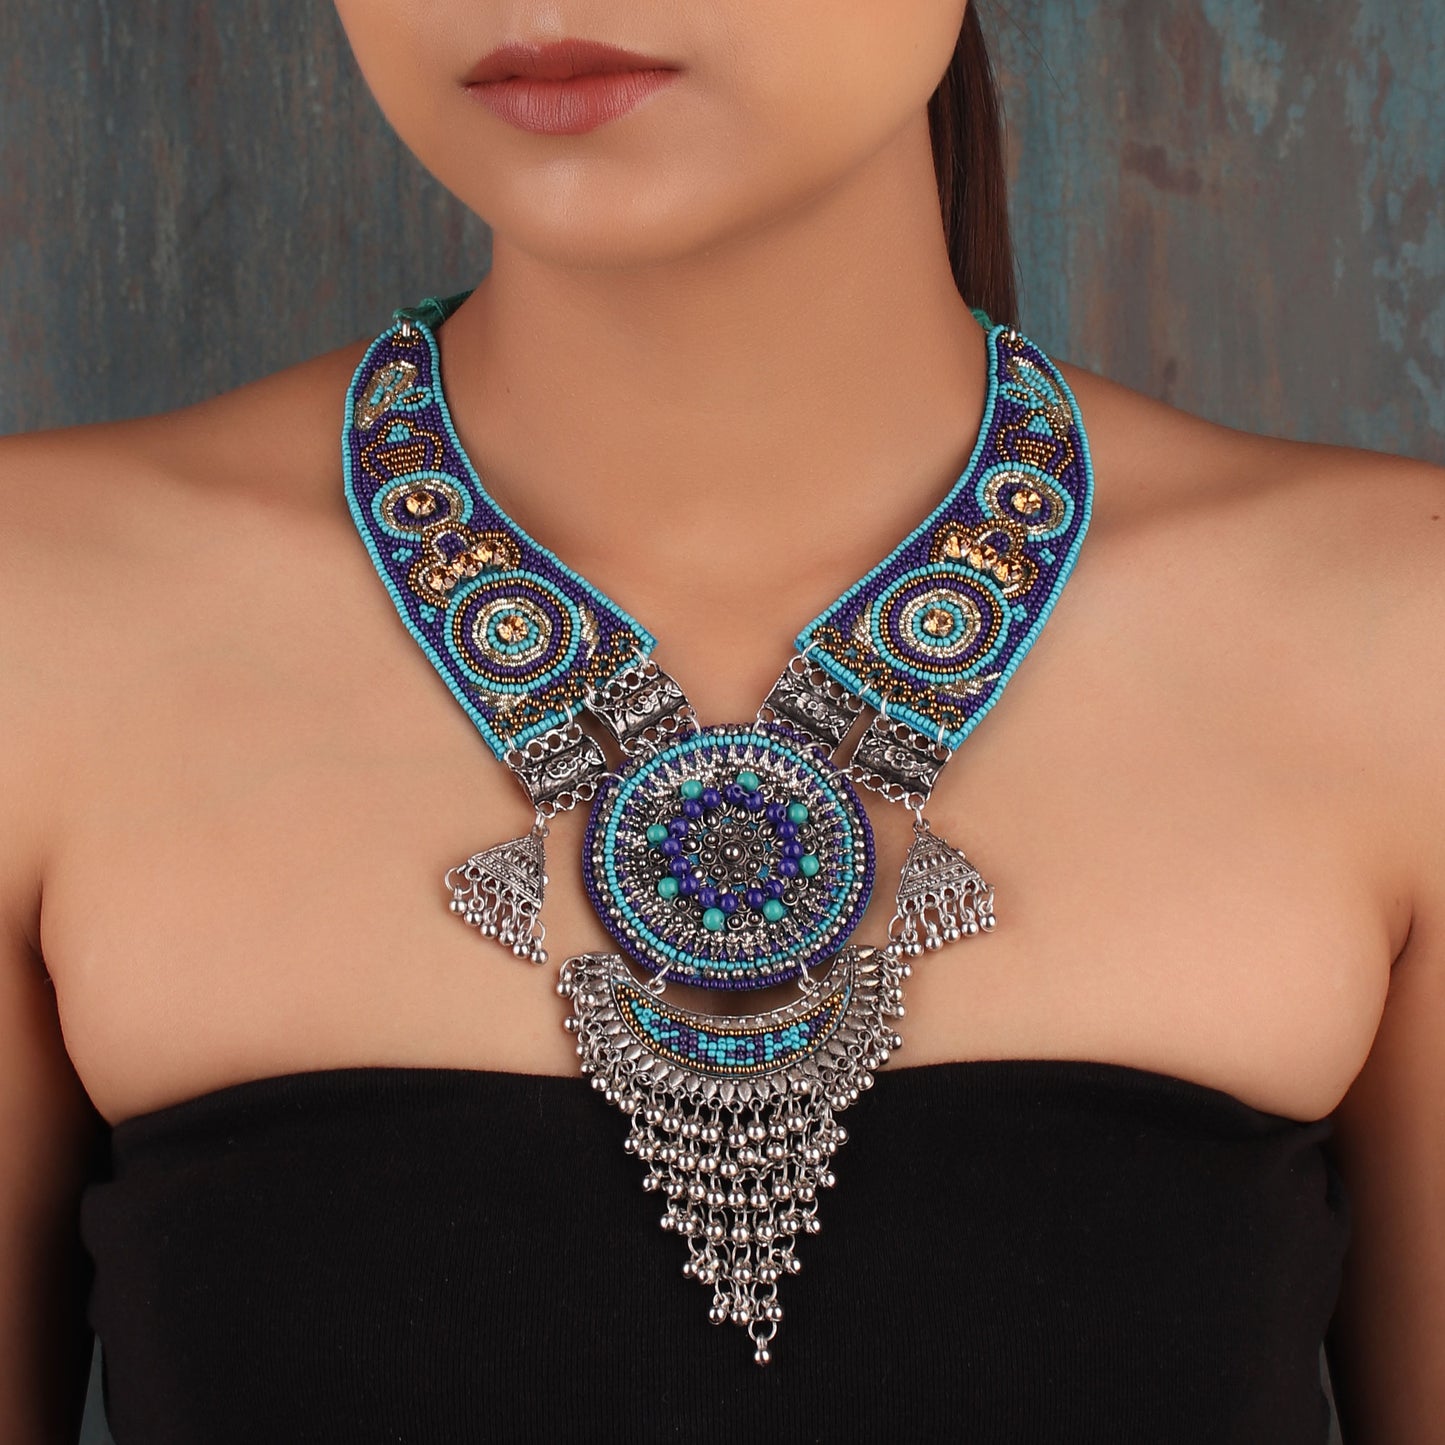 Necklace,The Picasso Art Necklace in Blue - Cippele Multi Store